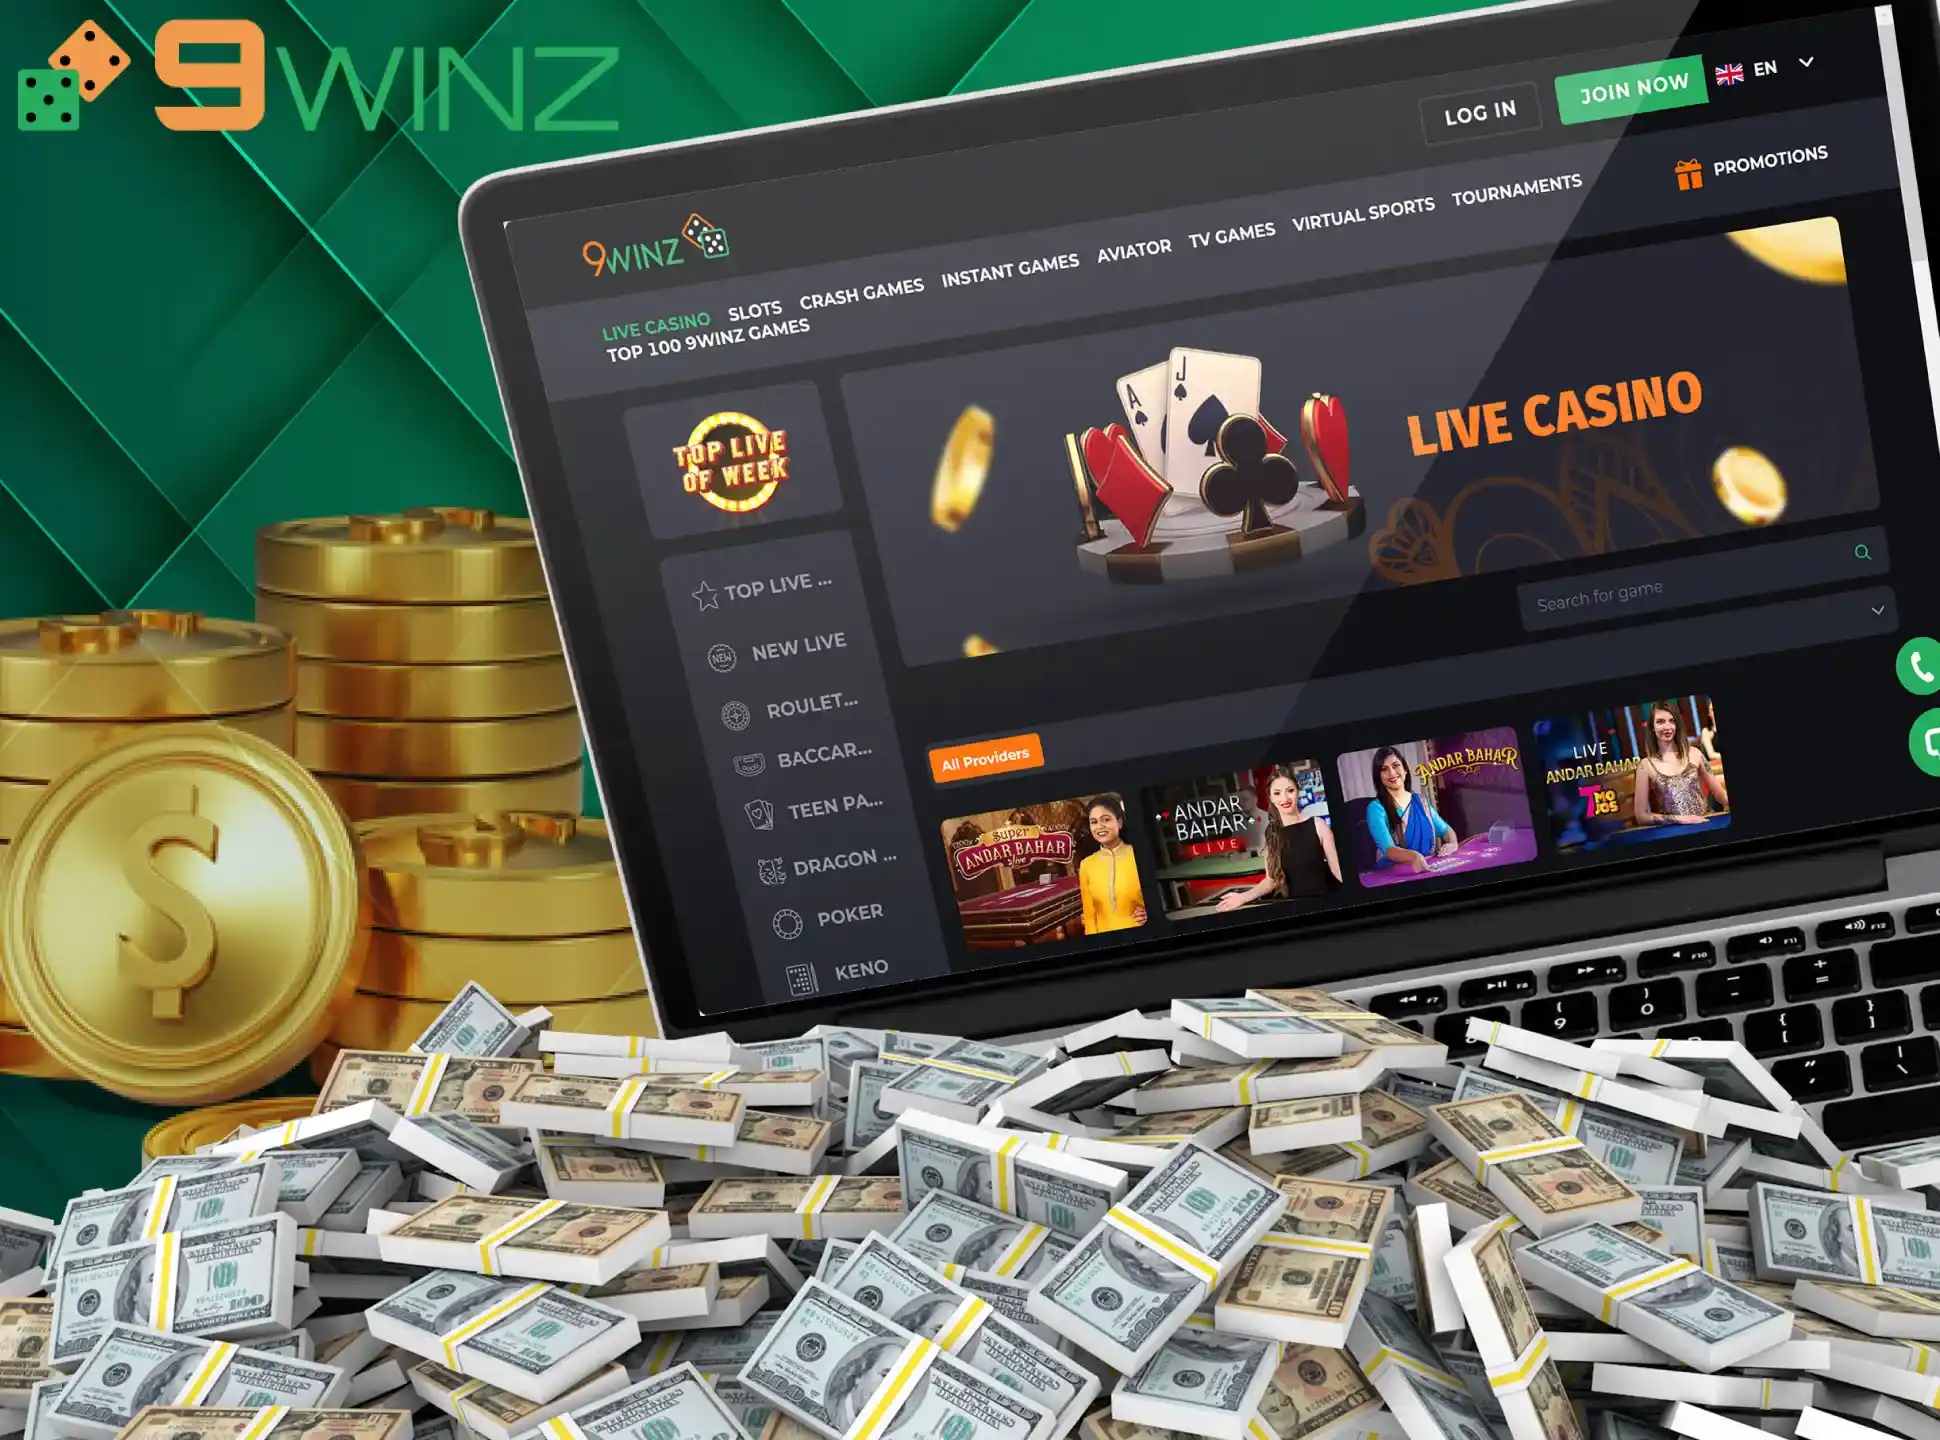 Registrate and join the game at the 9Winz casino.